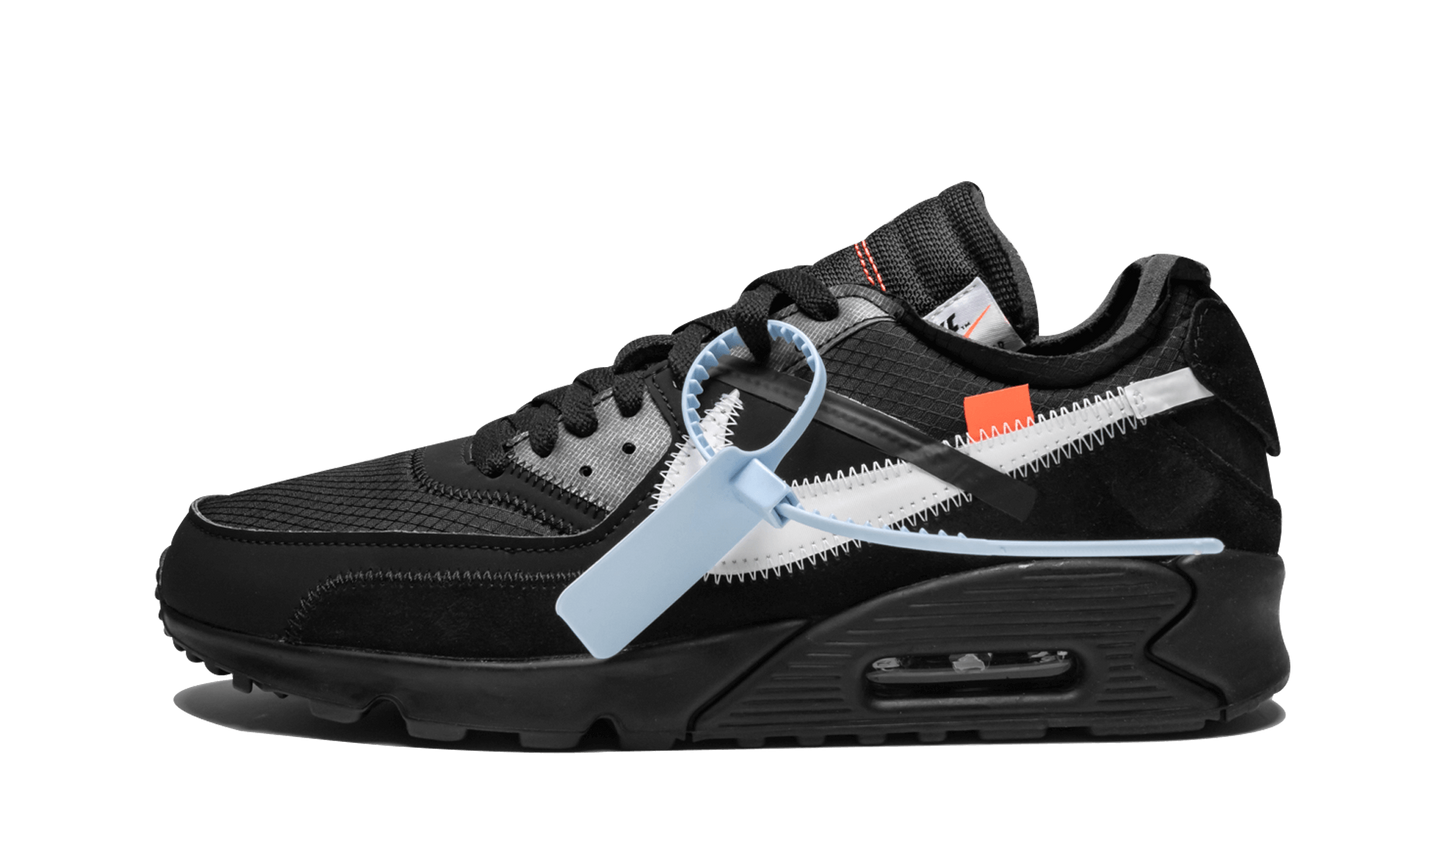 off white air max 90 where to buy